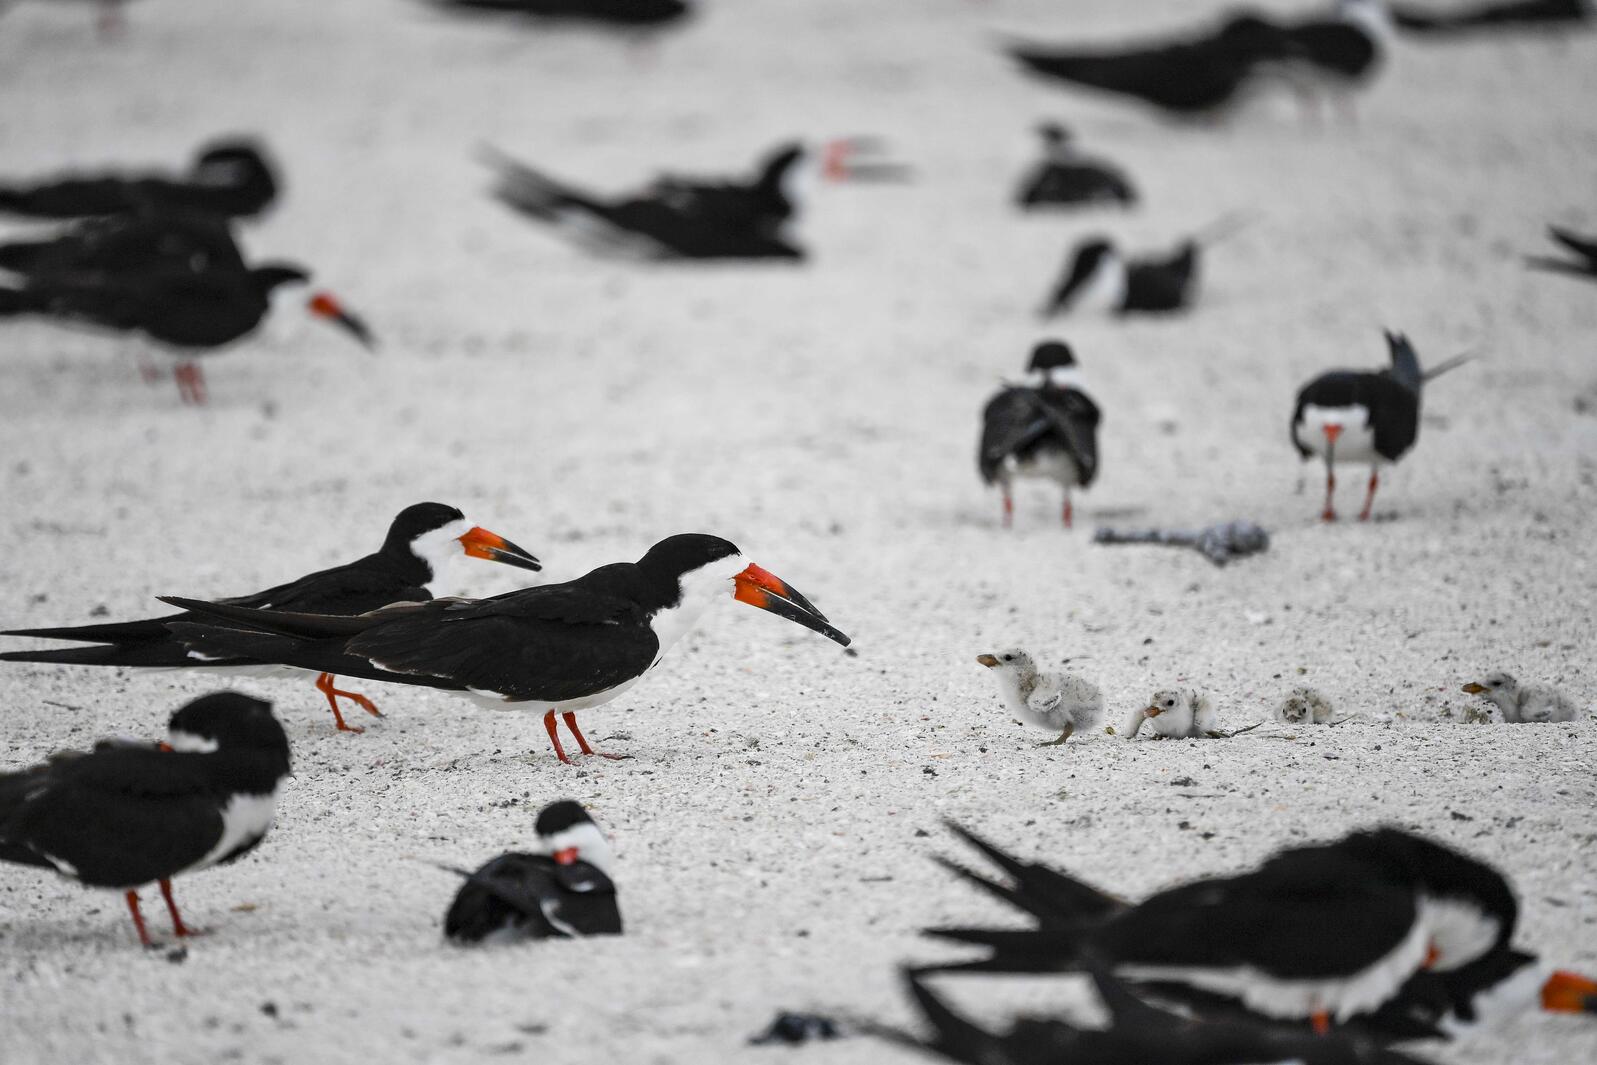 A bunch of black-and-white birds on a beach, some with fuzzy chicks.